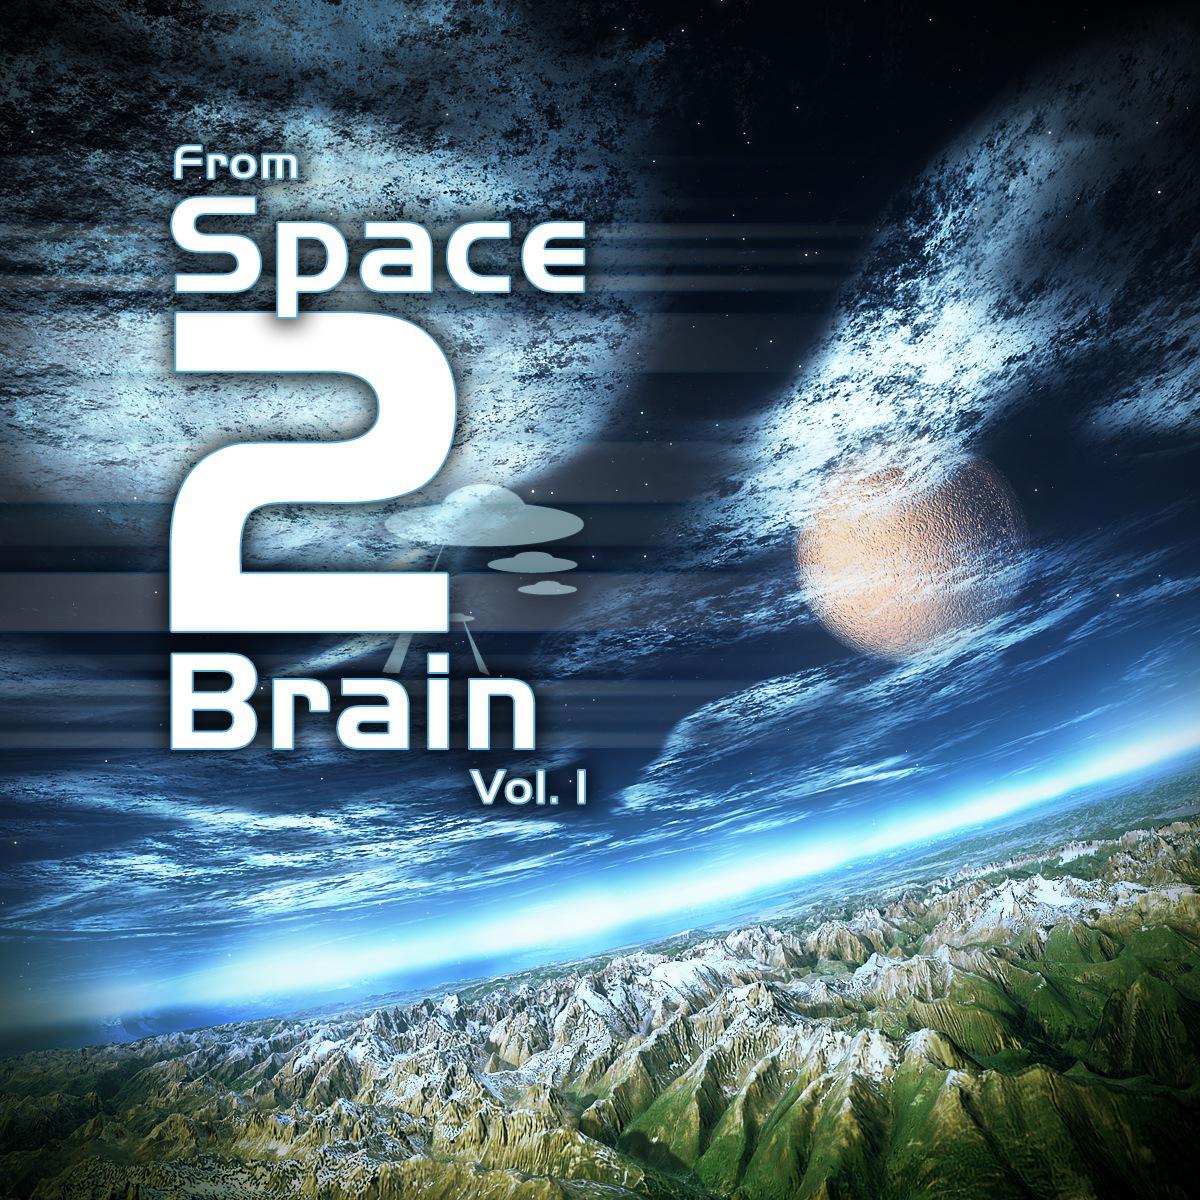 From Space 2 Brain Vol. 1